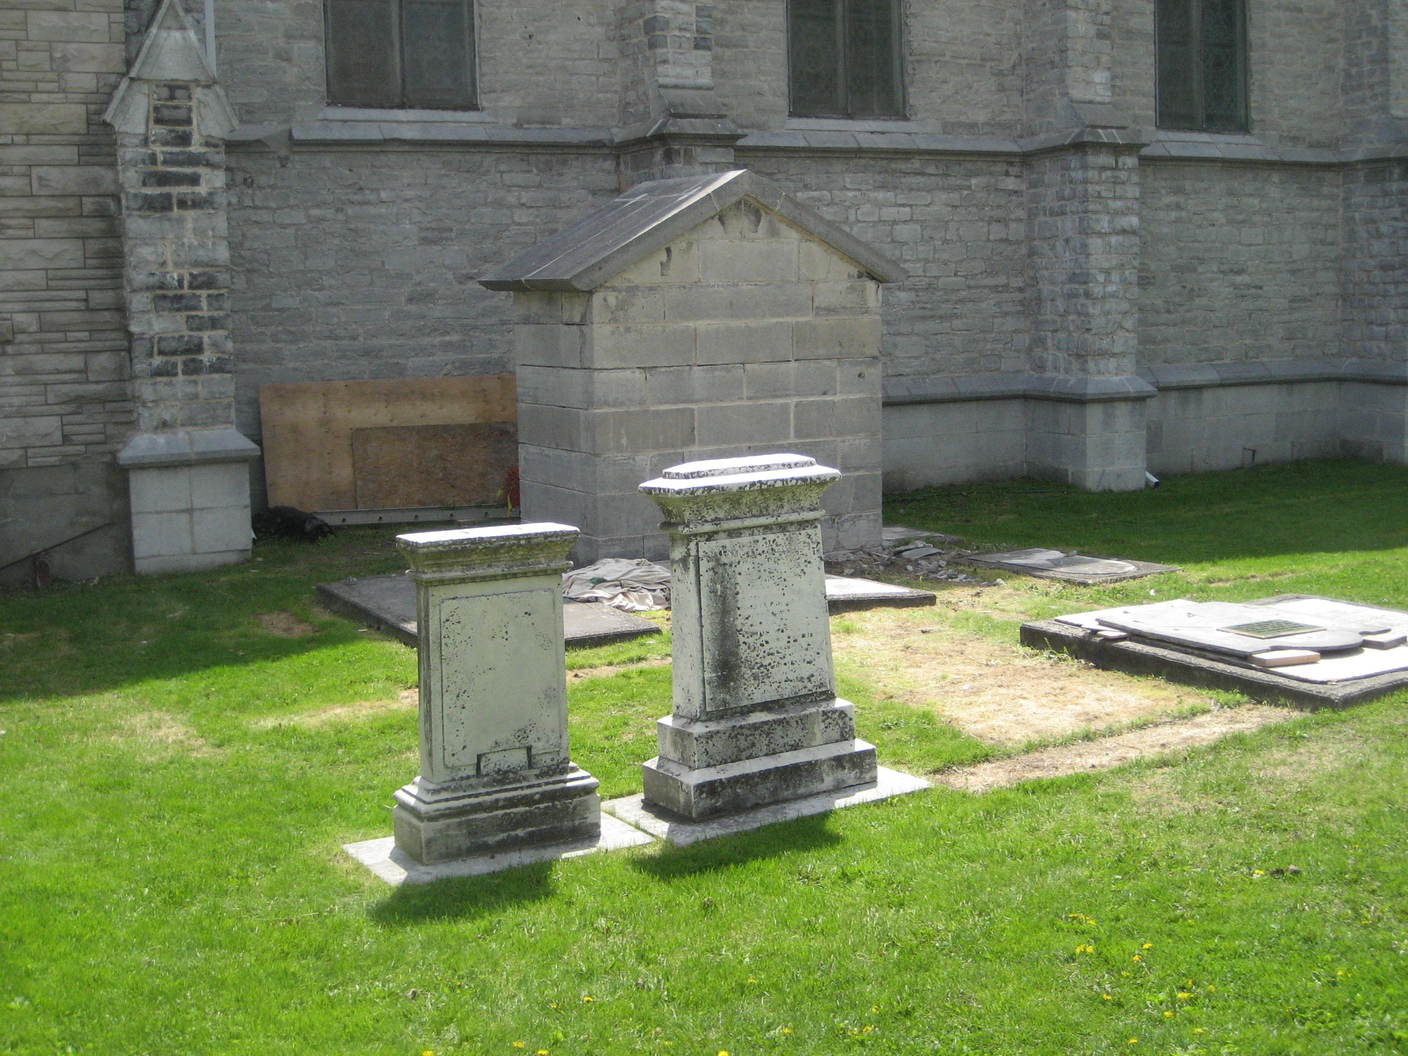 Forsyth Monument adjacent to the church in Kingston's Lower Burial Ground